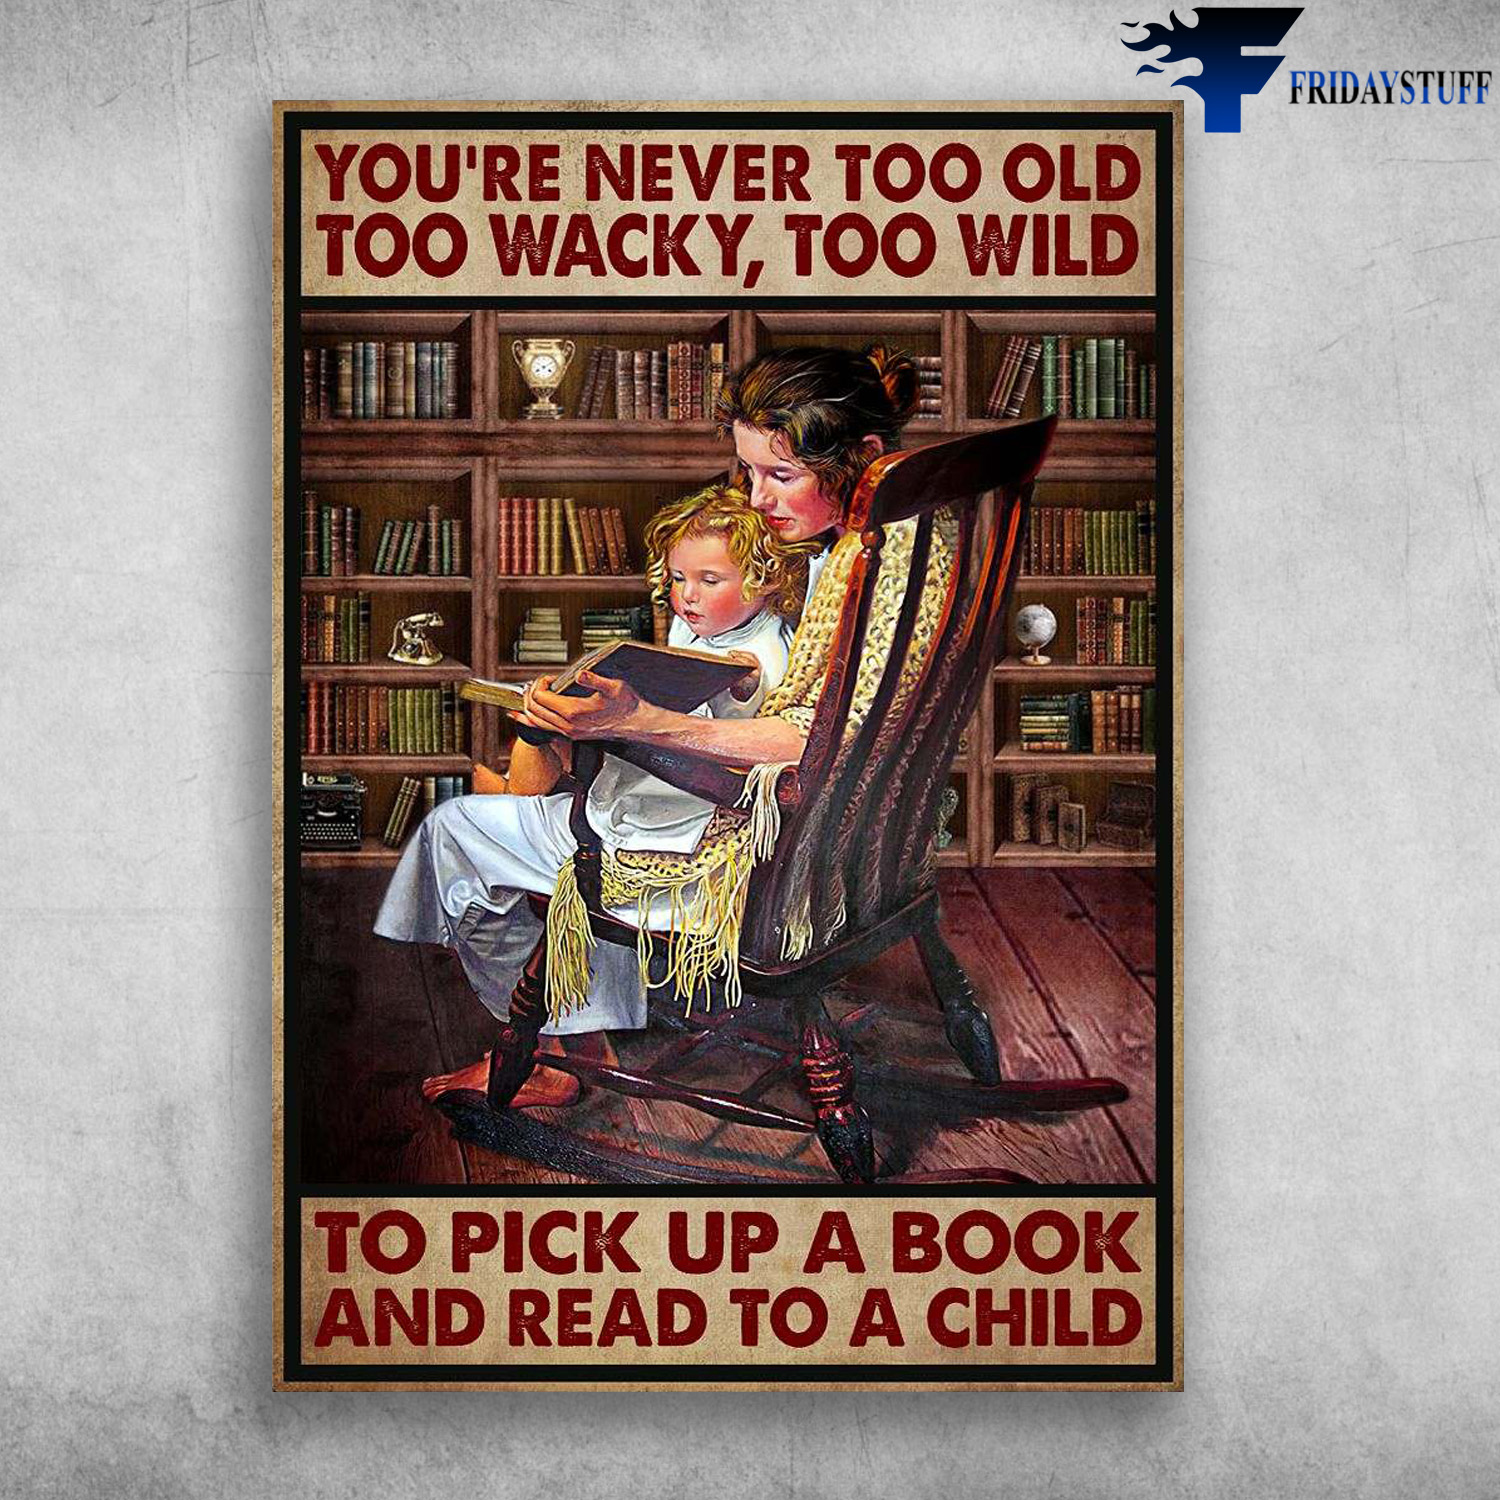 Mom And Daughter - You're Never Too Old, Too Wackey, Too Wild, To Pick Up A Book, And Read To A Child